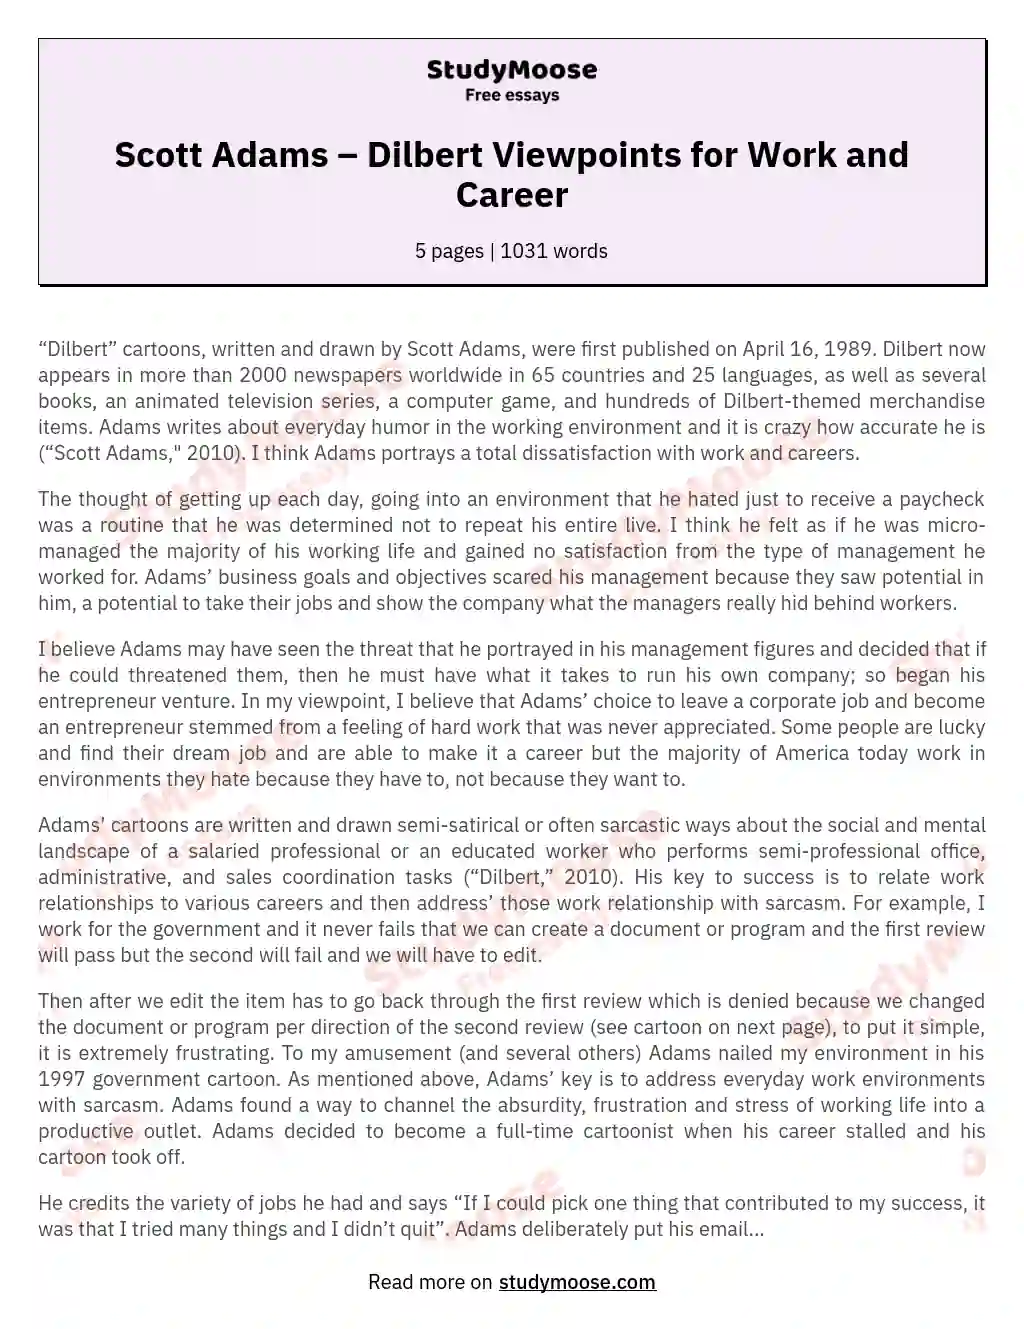 Scott Adams – Dilbert Viewpoints for Work and Career essay